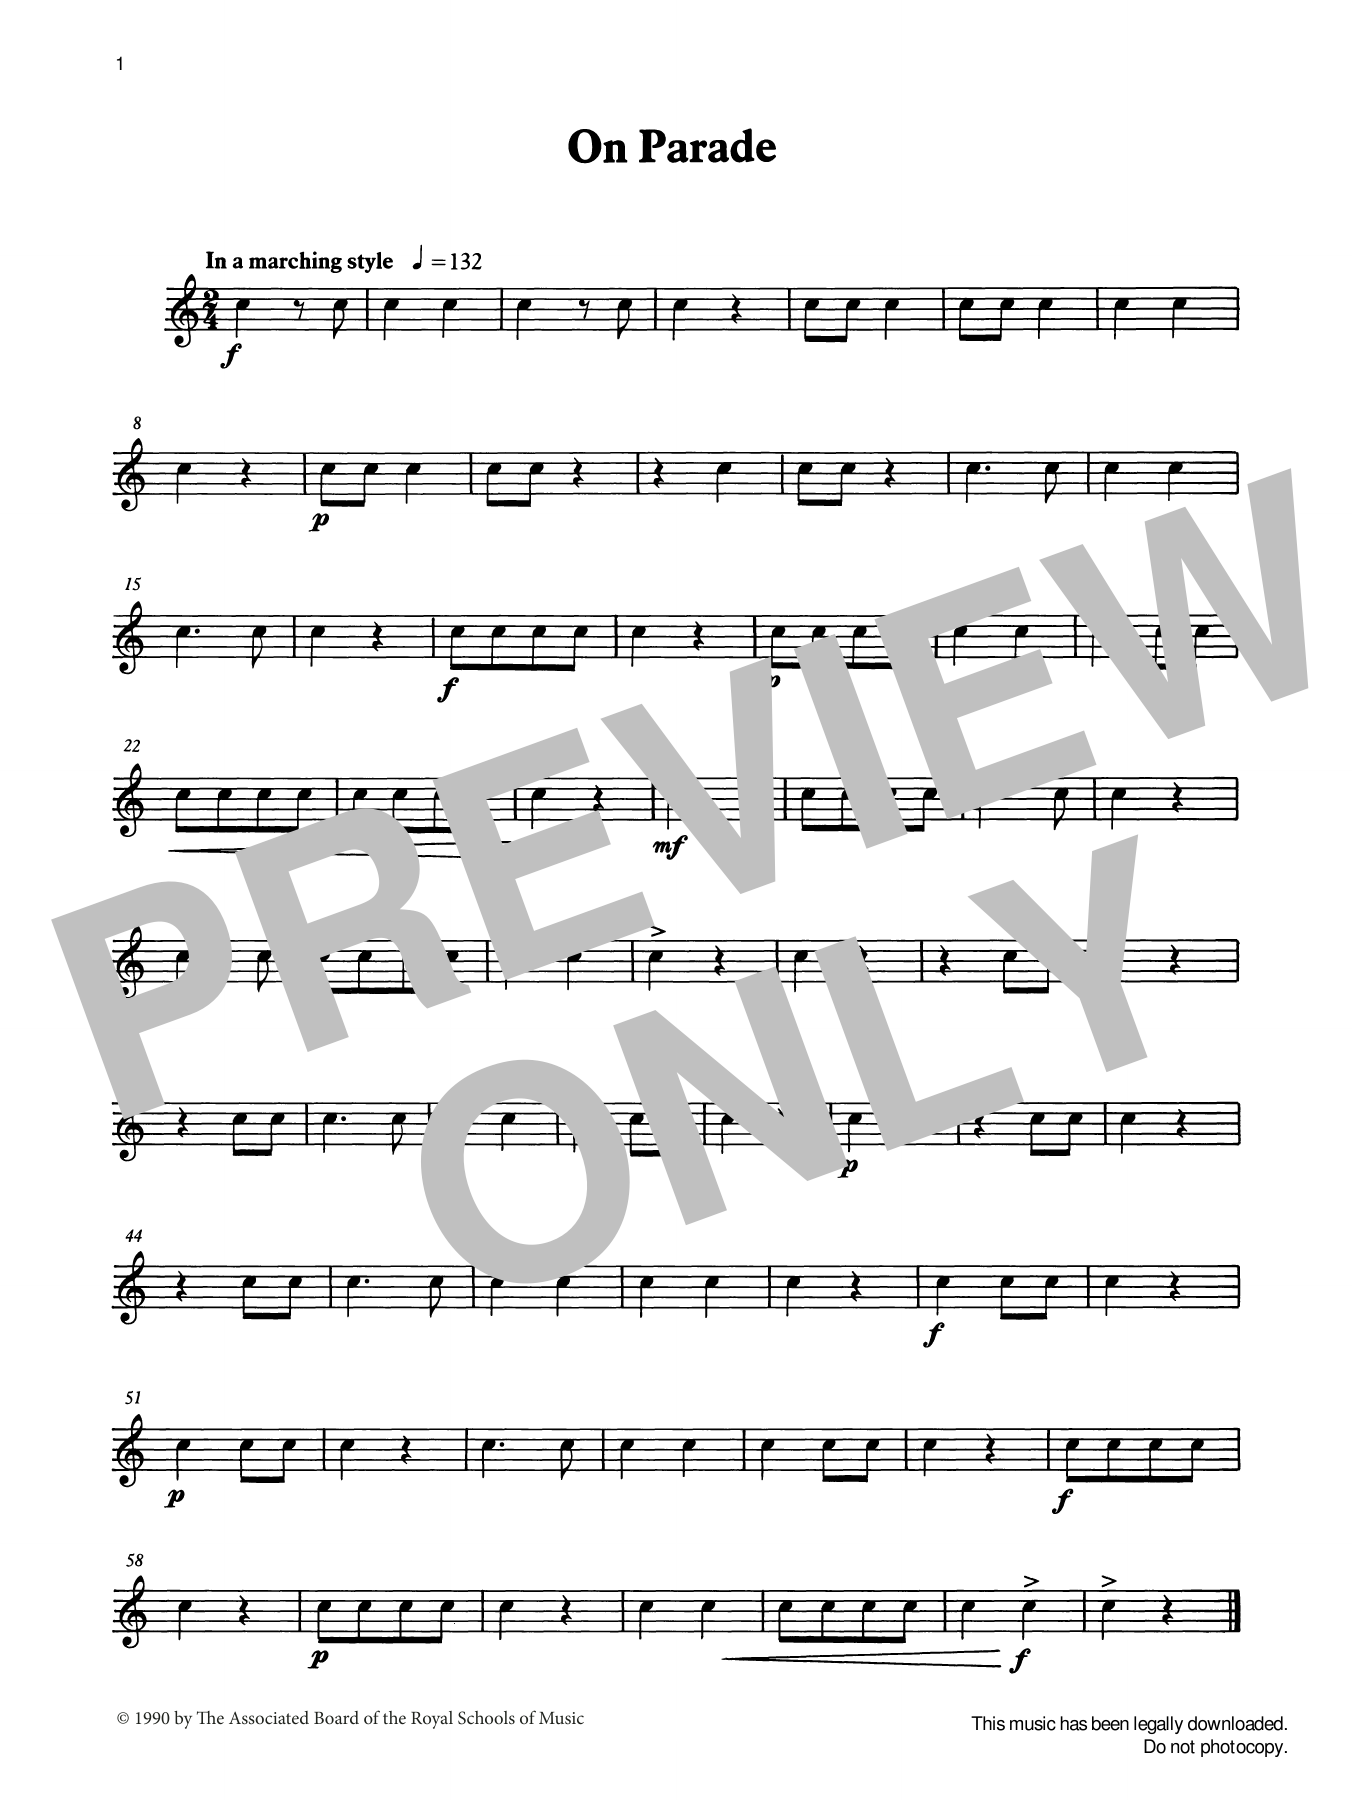 Download Ian Wright and Kevin Hathaway On Parade from Graded Music for Snare D Sheet Music